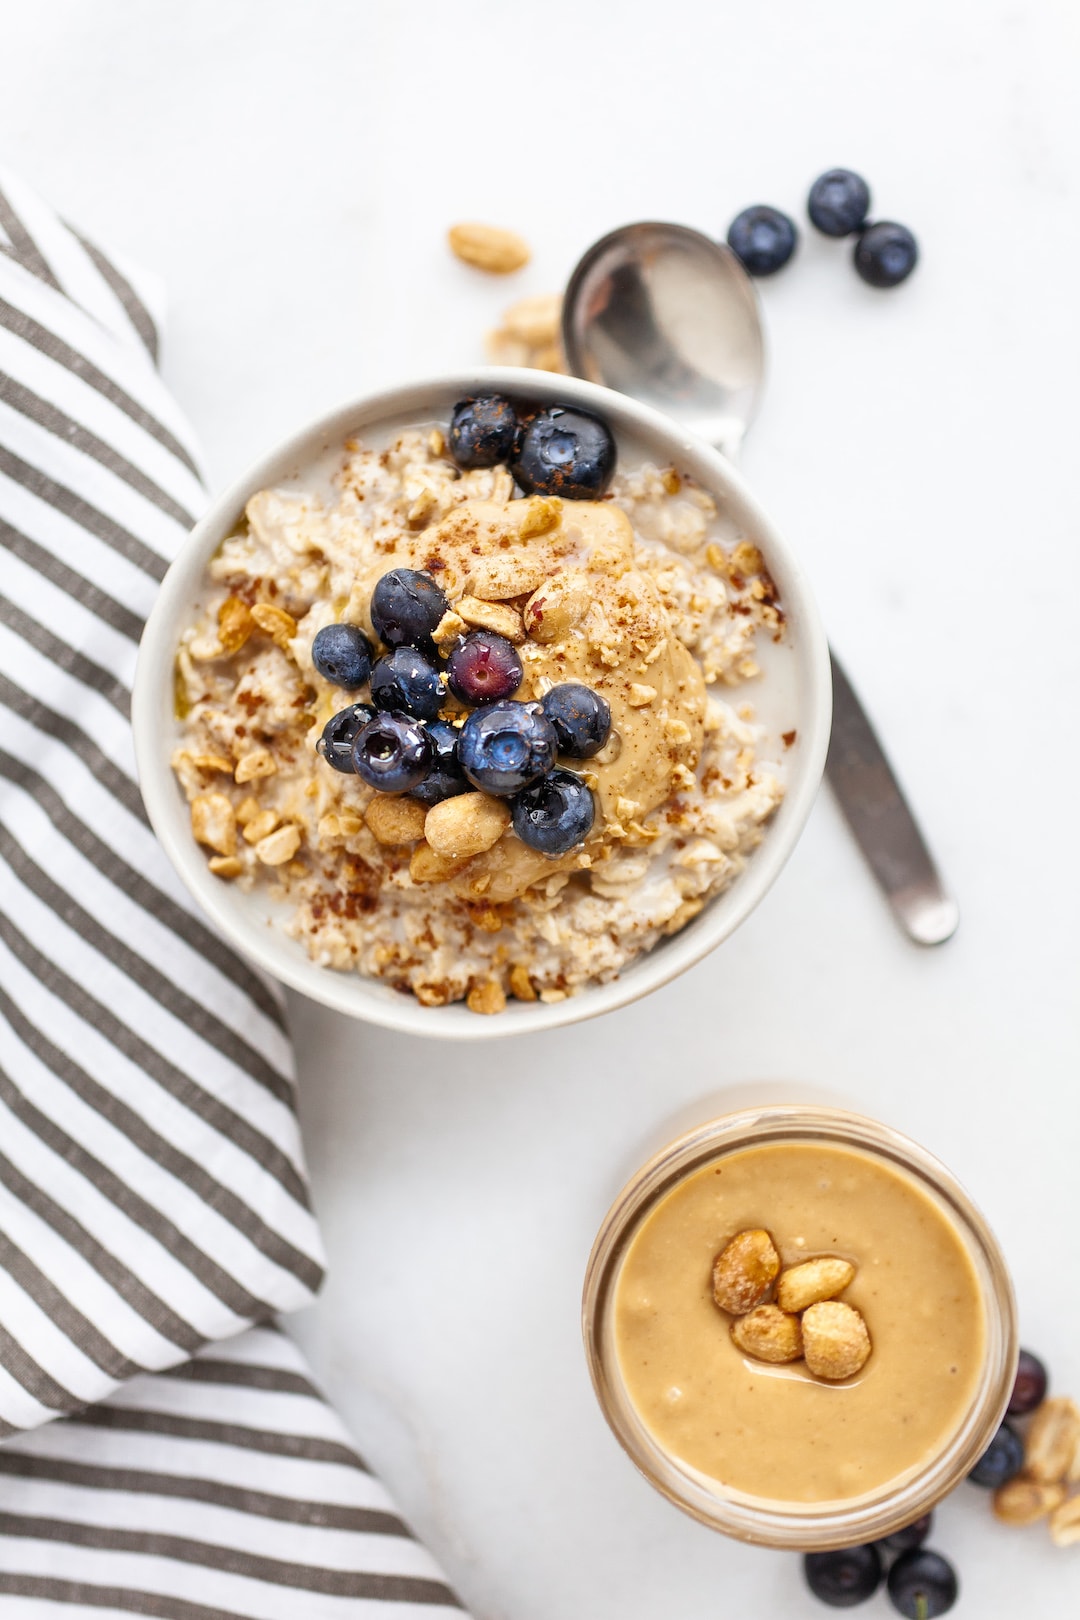 Delicious and Simple Peanut Butter Overnight Oats 